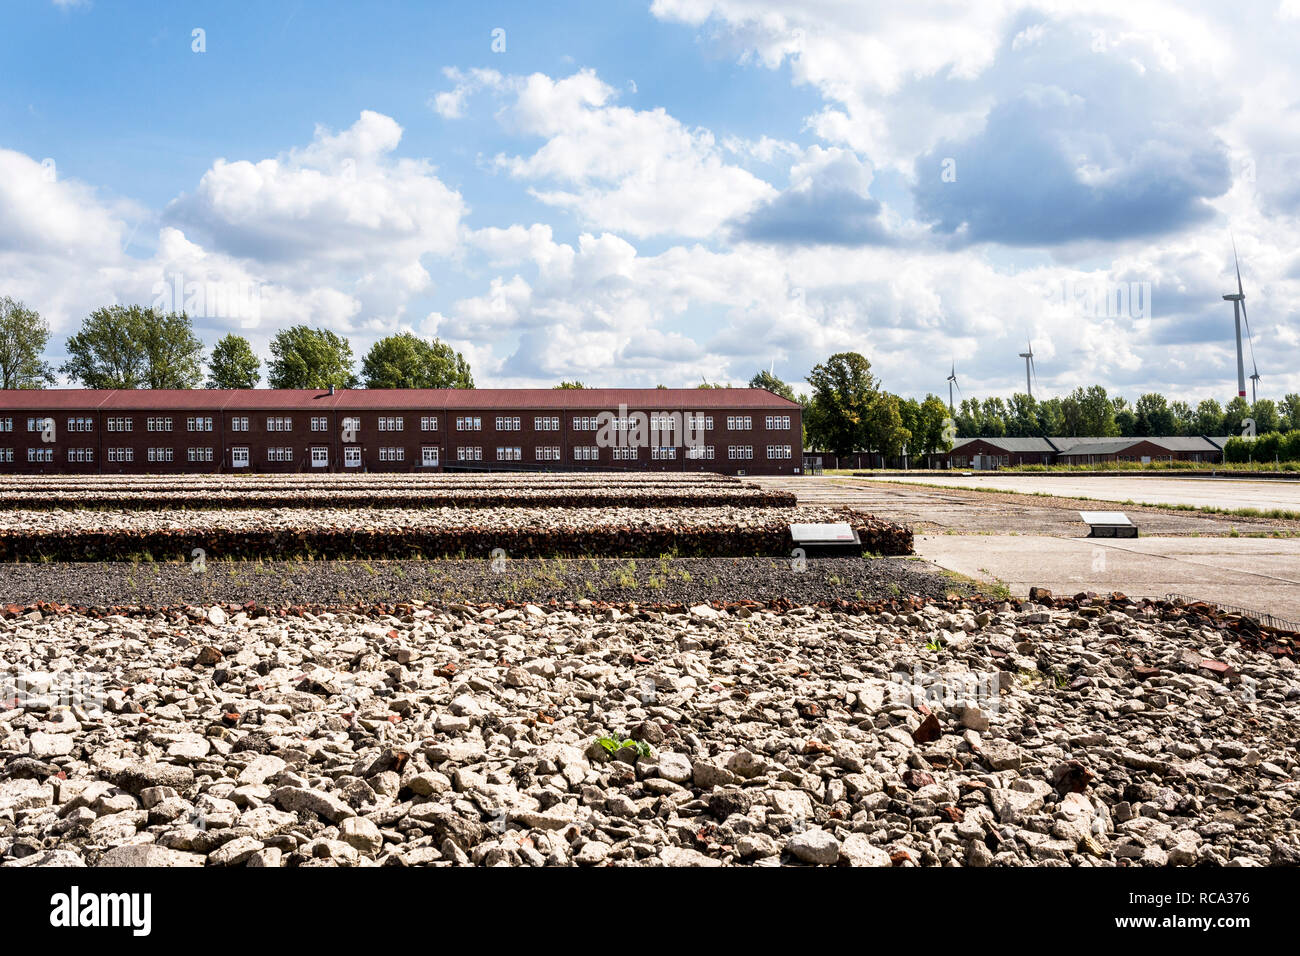 Concentrationcamp (KZ) Neuengamme in Hamburg-Neuengamme (Germany); Konzentrationslager (KZ) Neuengamme in Hamburg-Neuengamme Stock Photo